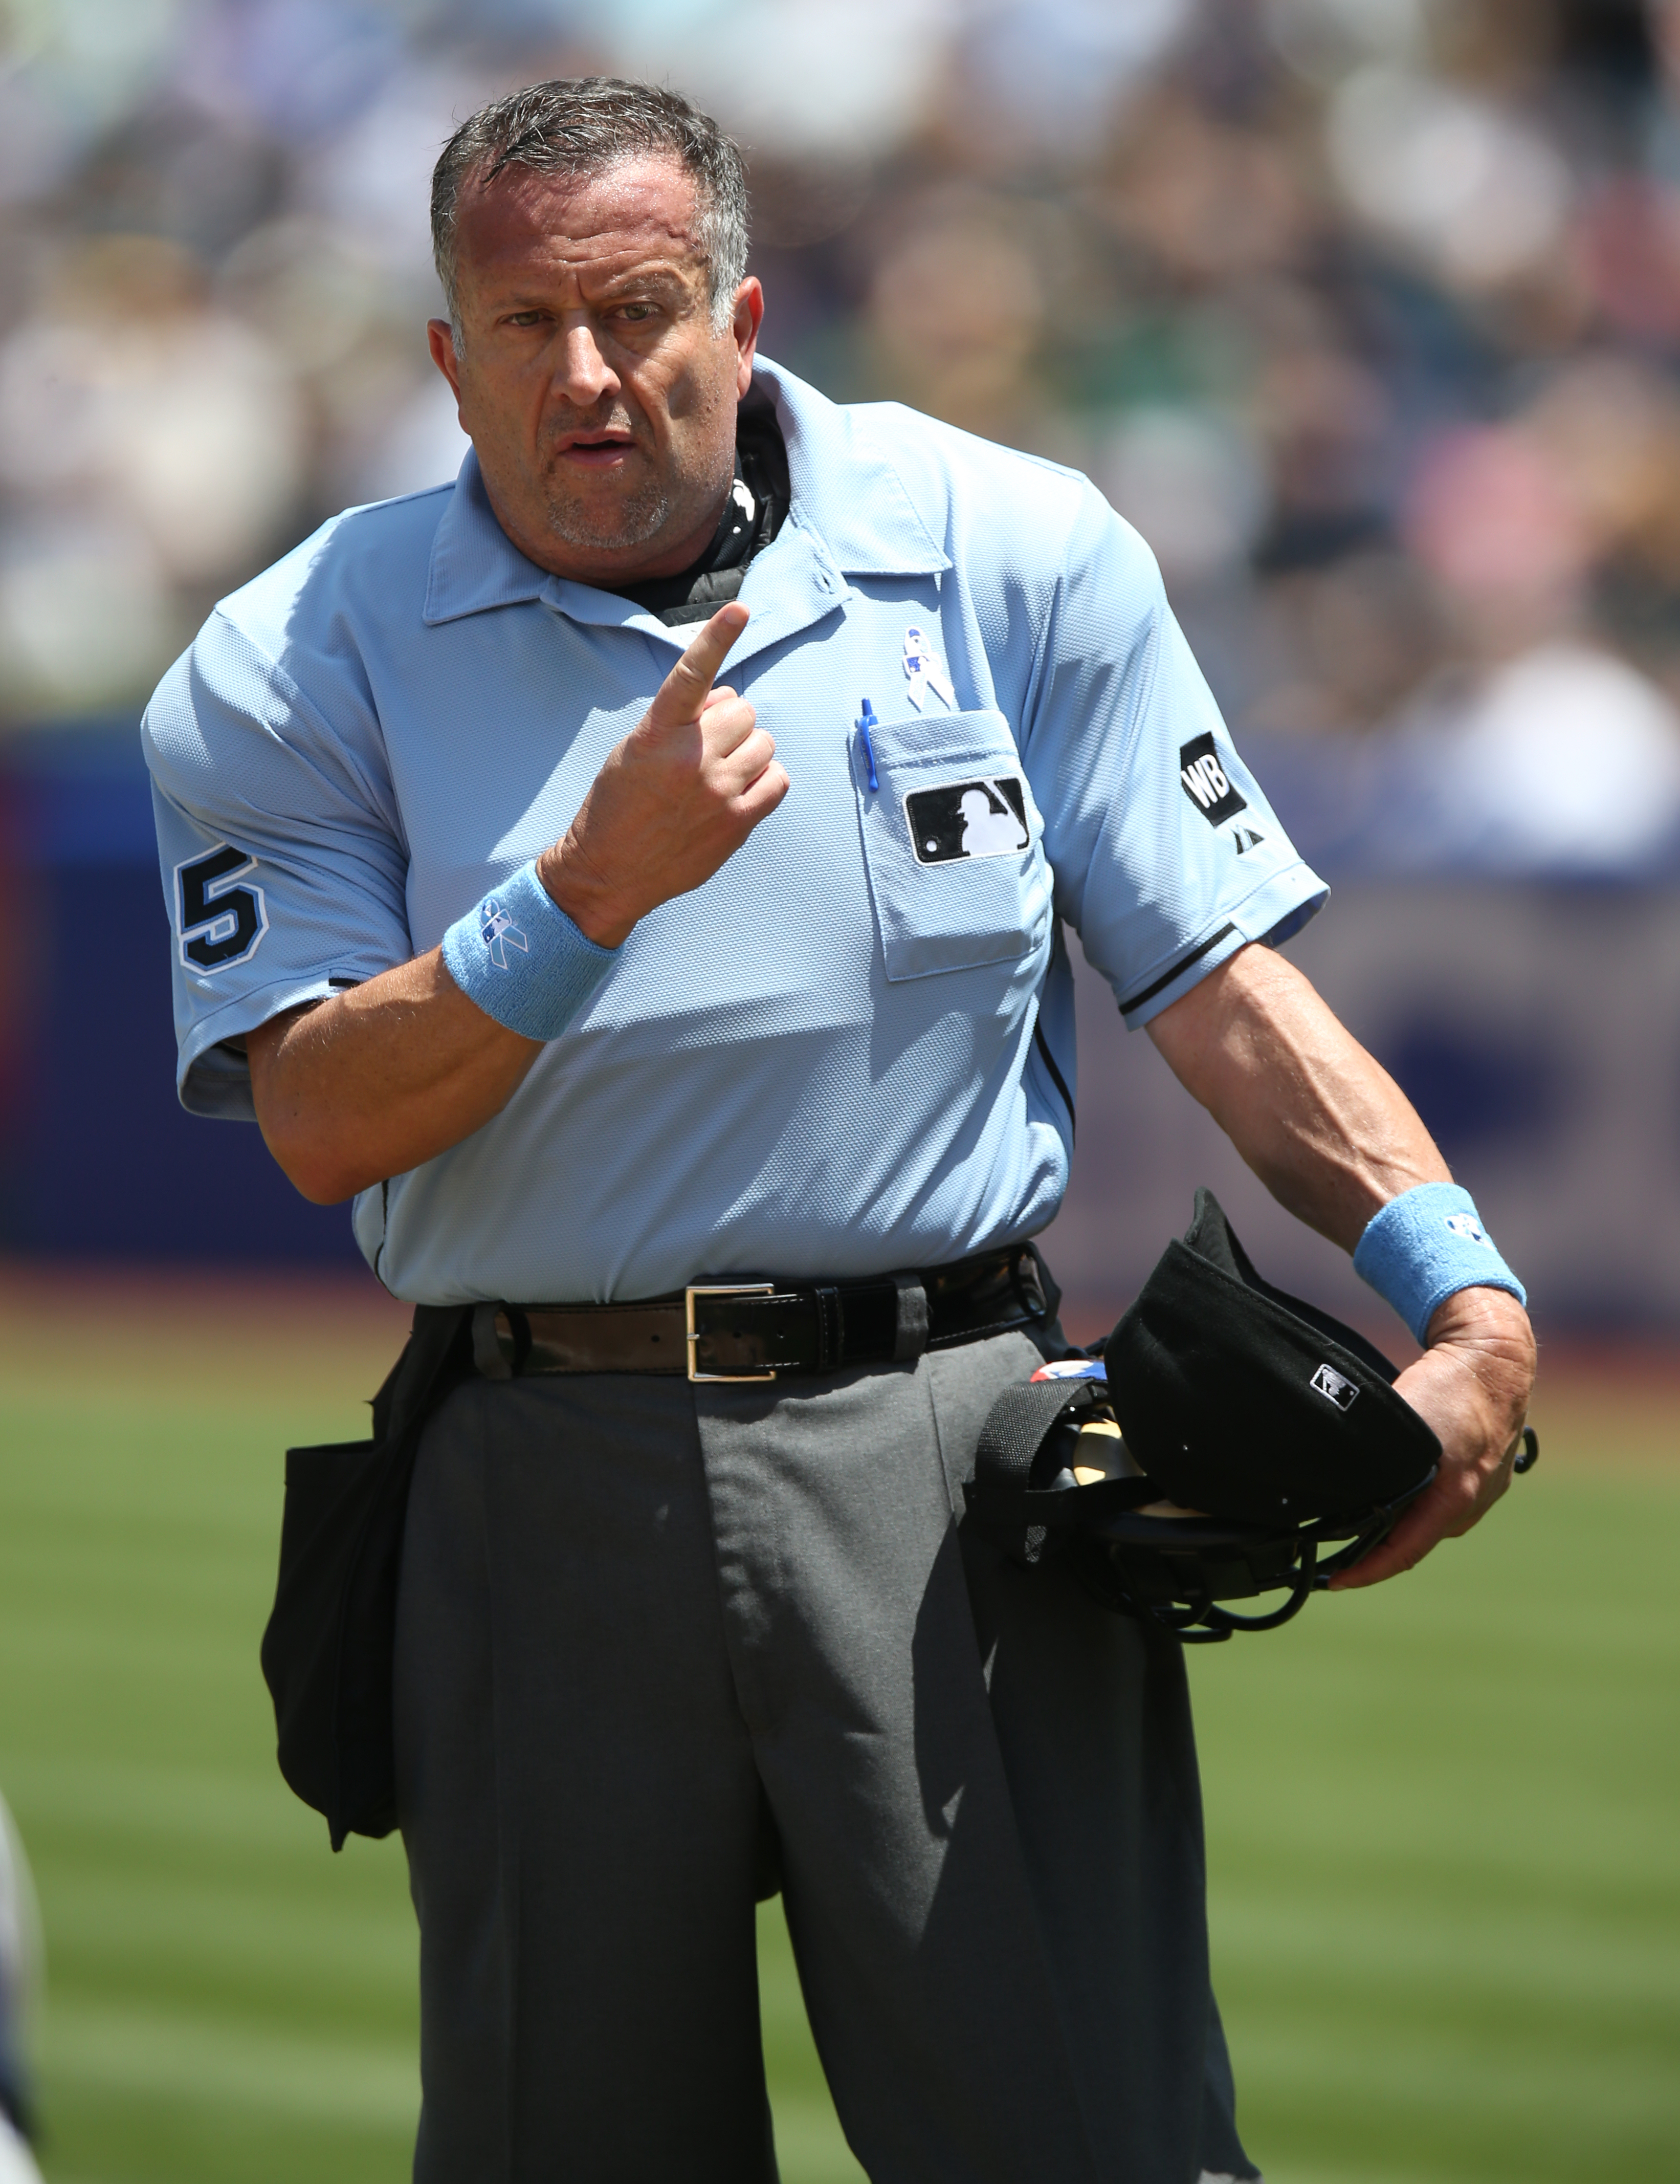 MLB umpire Dale Scott says he is gay